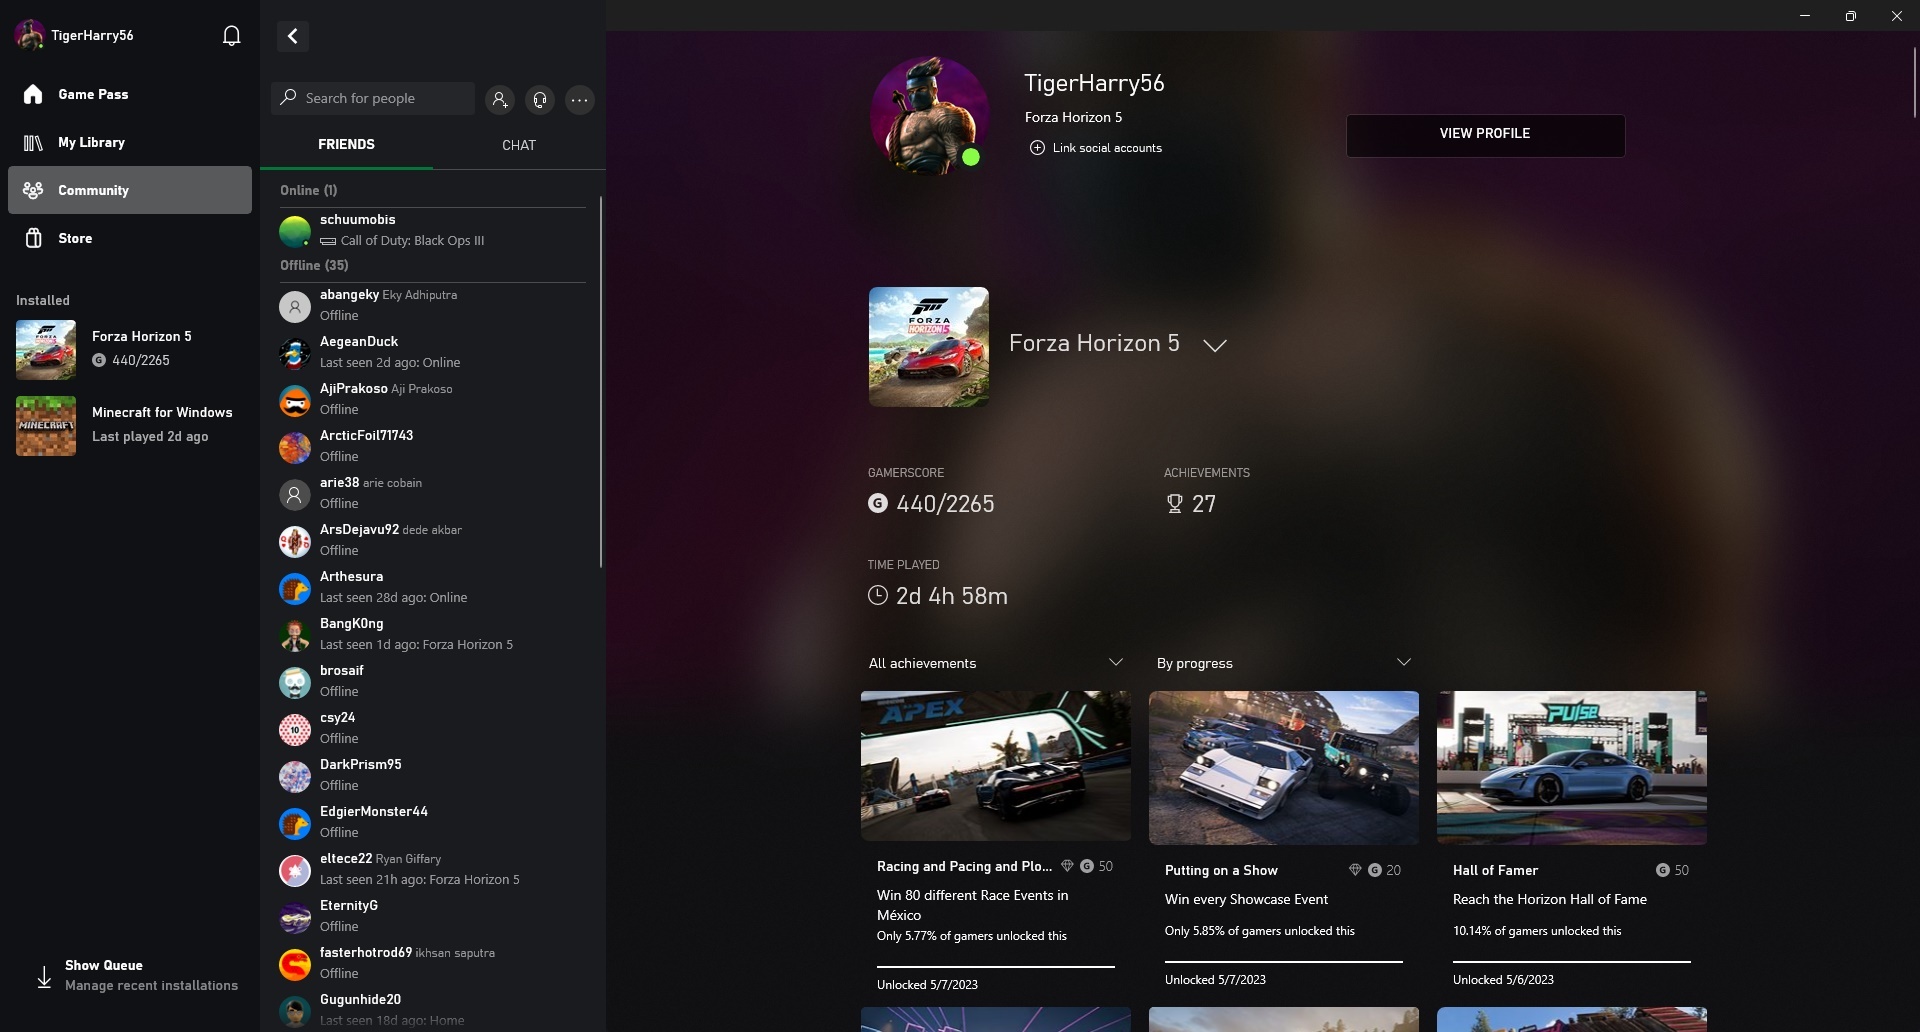 Forza Horizon 5 Google drive download link and install step by step  #link  Google drive download link Notic One day only 11 Part download and naxt  part Download 24 hours bad